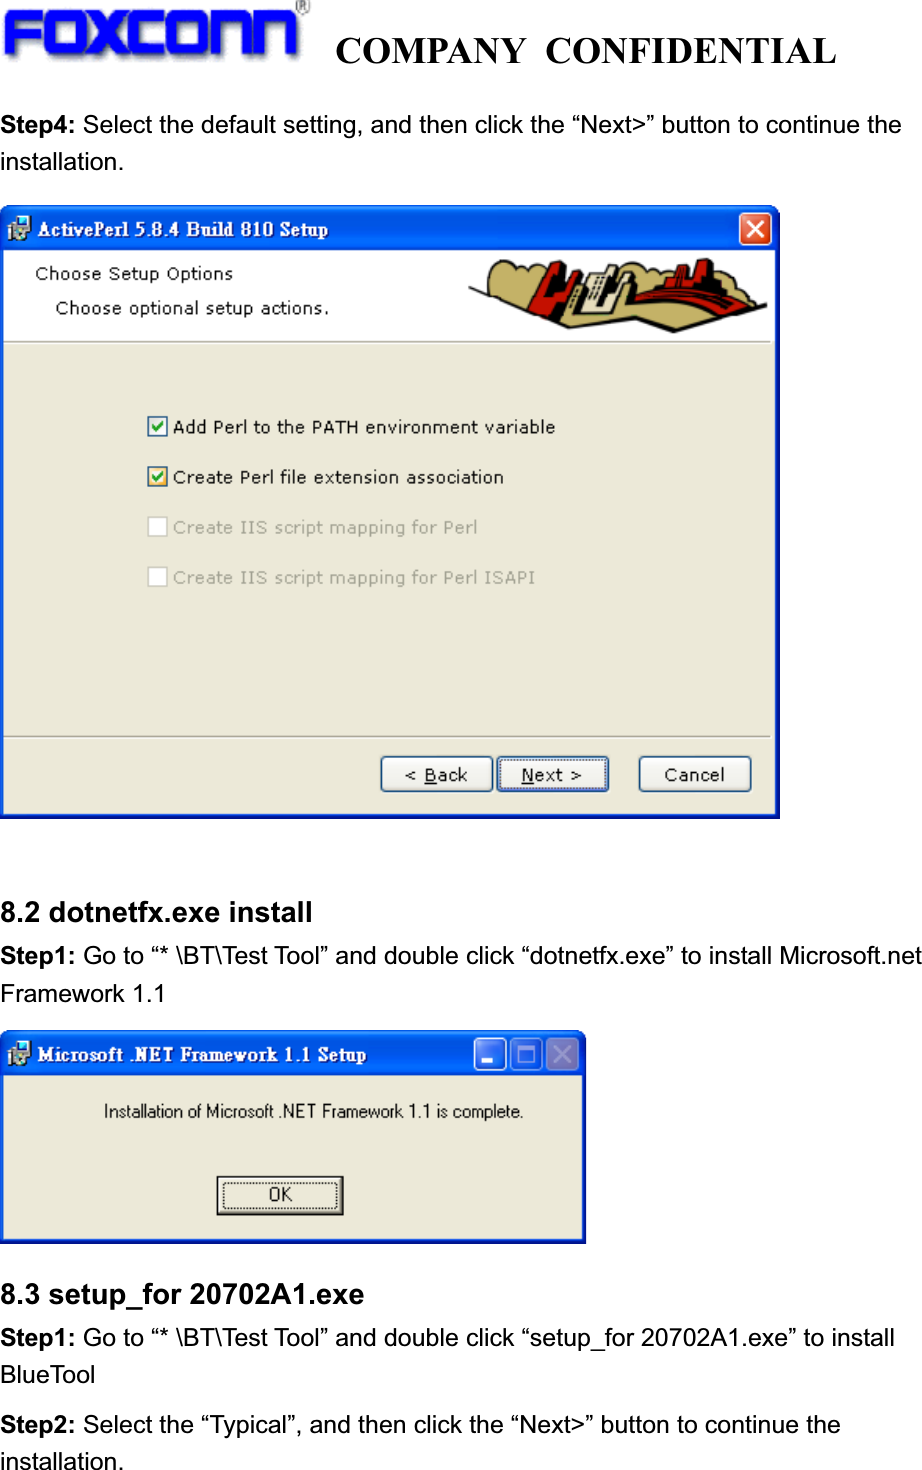   COMPANY CONFIDENTIAL             Step4: Select the default setting, and then click the “Next&gt;” button to continue the installation. 8.2 dotnetfx.exe install Step1: Go to “* \BT\Test Tool” and double click “dotnetfx.exe” to install Microsoft.net Framework 1.1 8.3 setup_for 20702A1.exe Step1: Go to “* \BT\Test Tool” and double click “setup_for 20702A1.exe” to install BlueTool Step2: Select the “Typical”, and then click the “Next&gt;” button to continue the installation. 